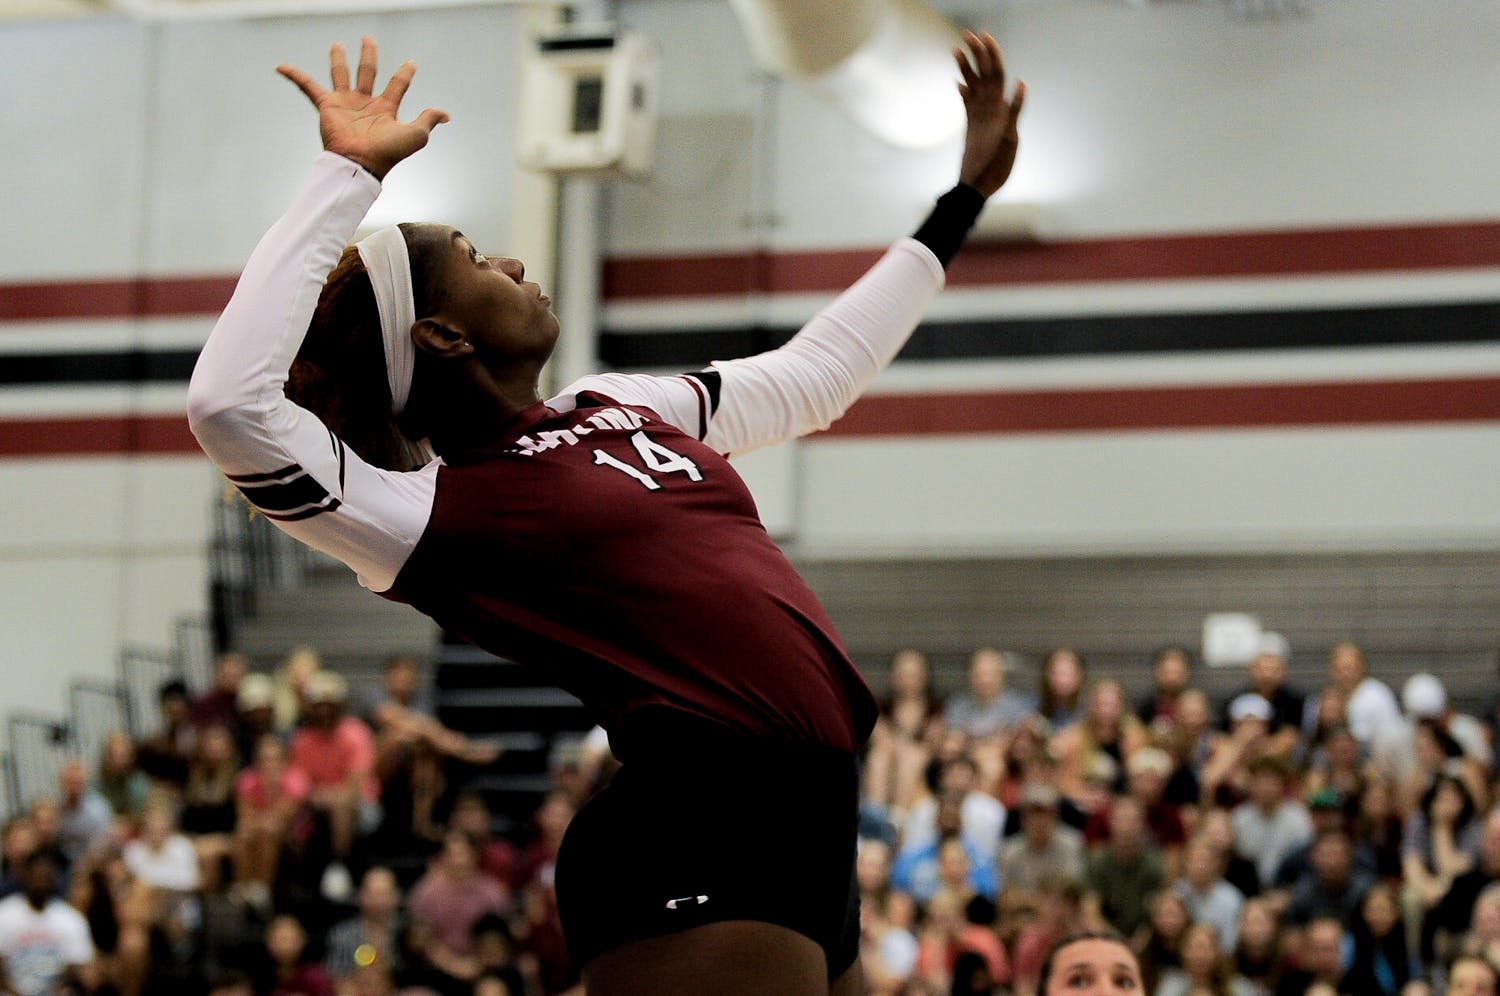 Junior outside hitter Kiune Fletcher jumps for the ball during the second set against Omaha during the Carolina Classic on August 27, 2022 at the Carolina Volleyball Center. The Gamecocks defeated Omaha 3-0.